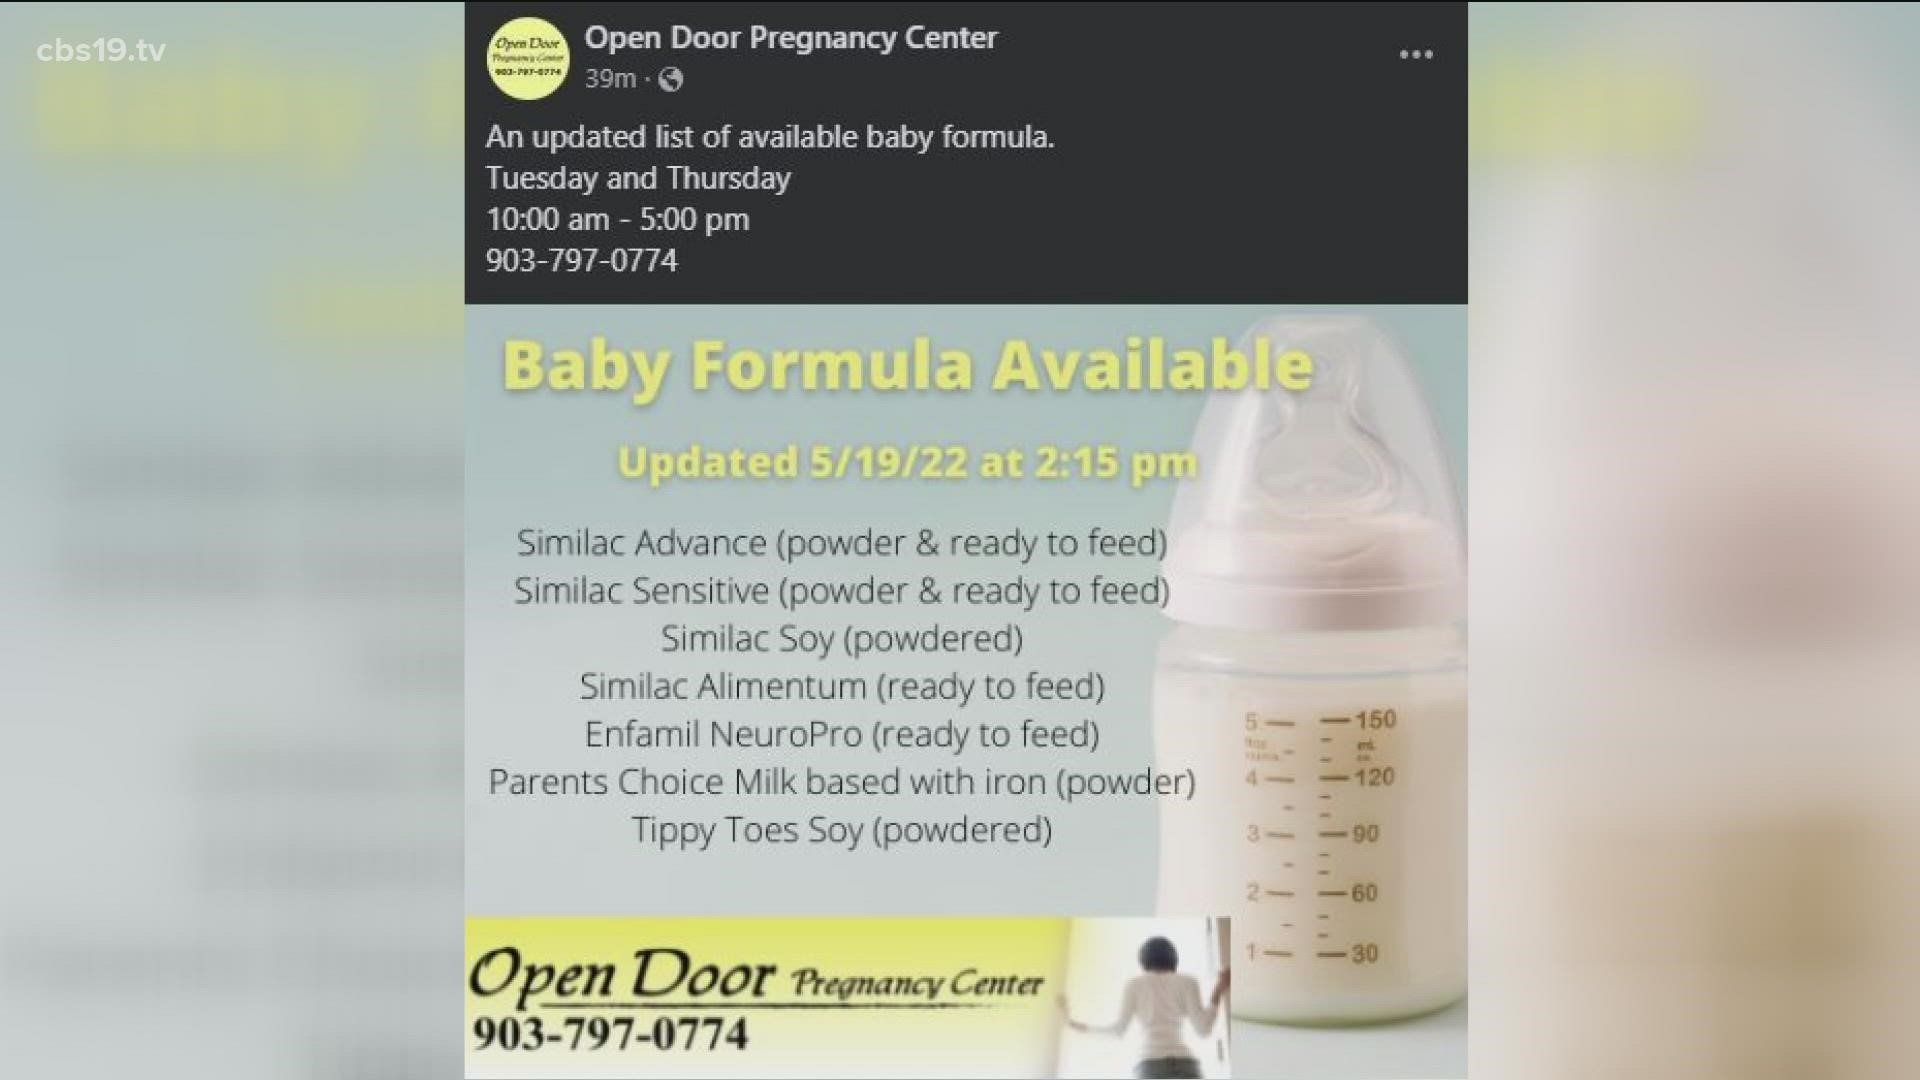 Open Door Pregnancy Center in Gilmer is stepping up to help Northeast Texans struggling to find baby formula.